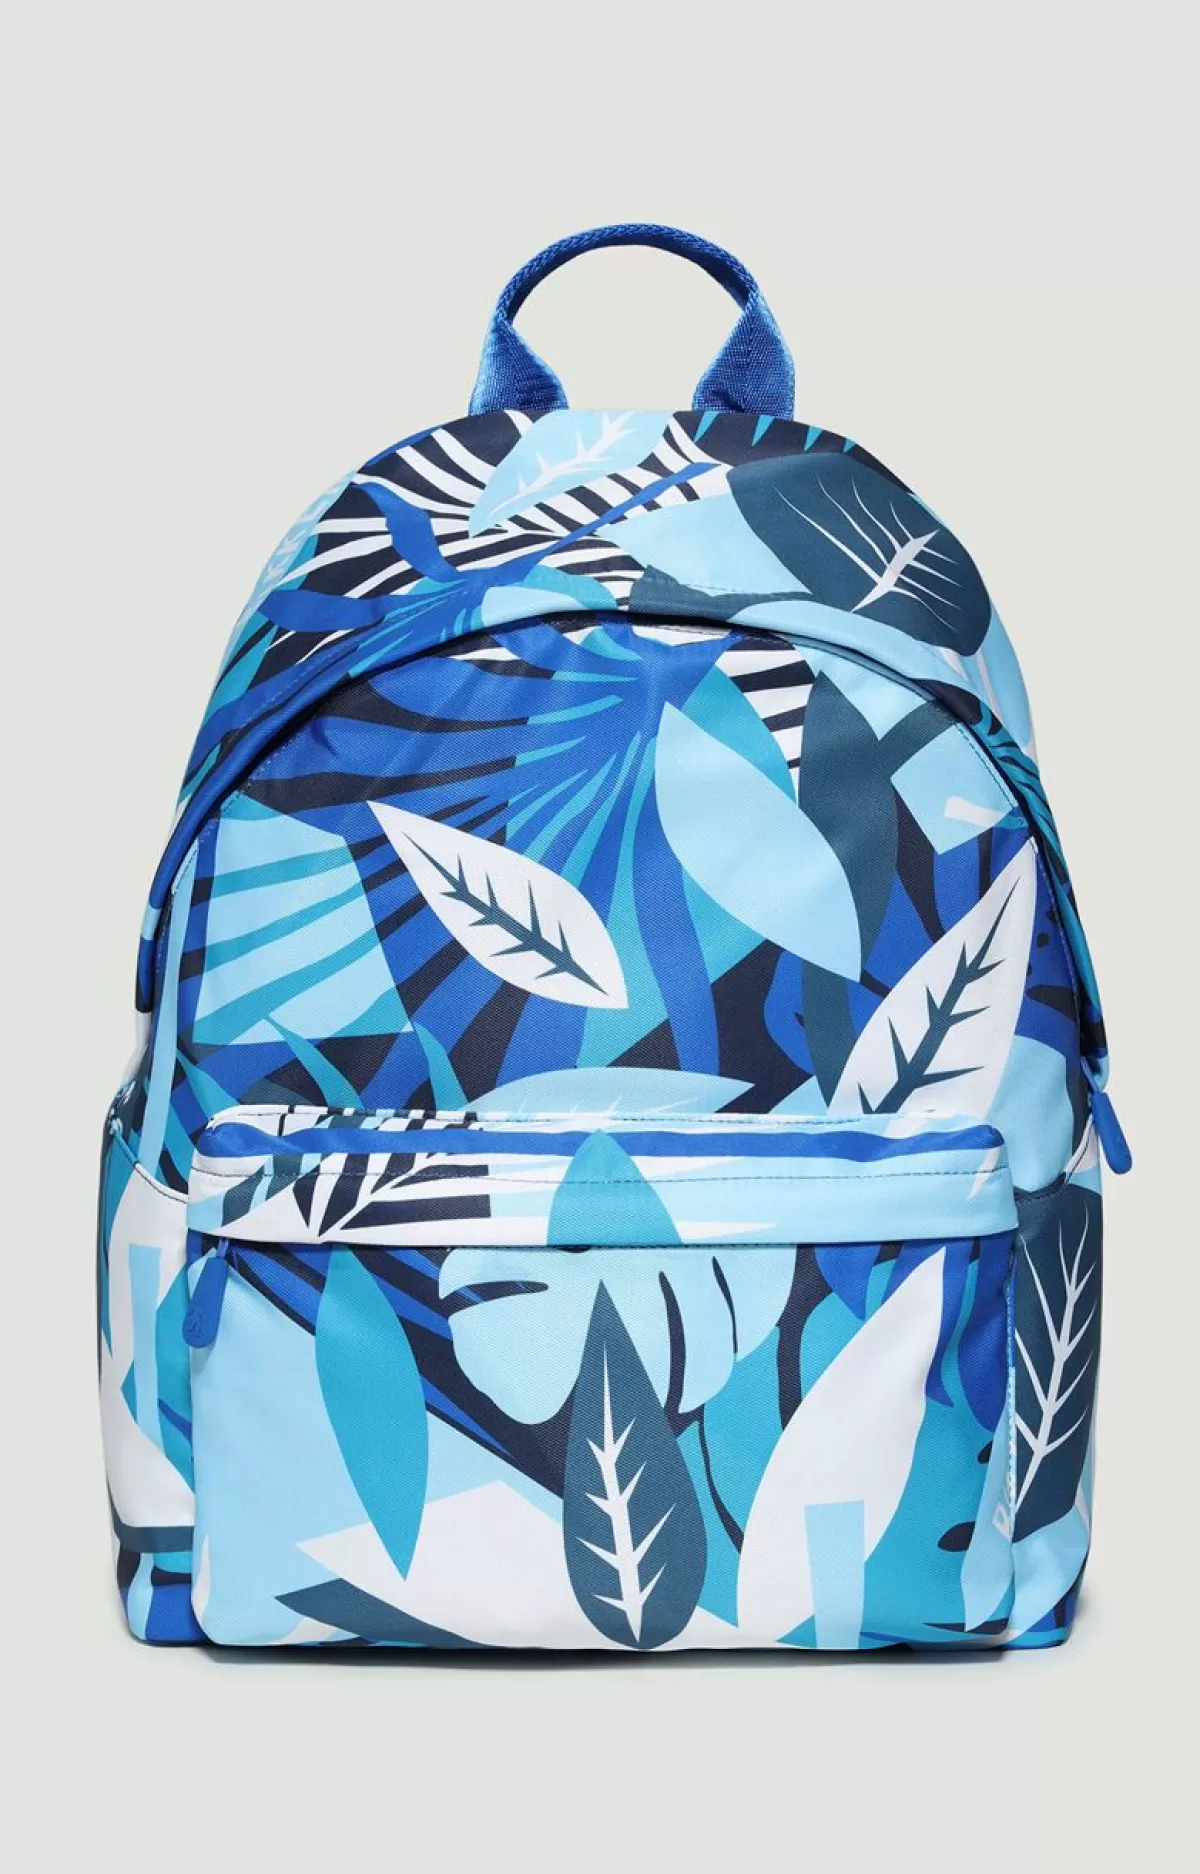 Bikkembergs Men'S Backpack - Tiago With All-Over Print Allover Print Shop